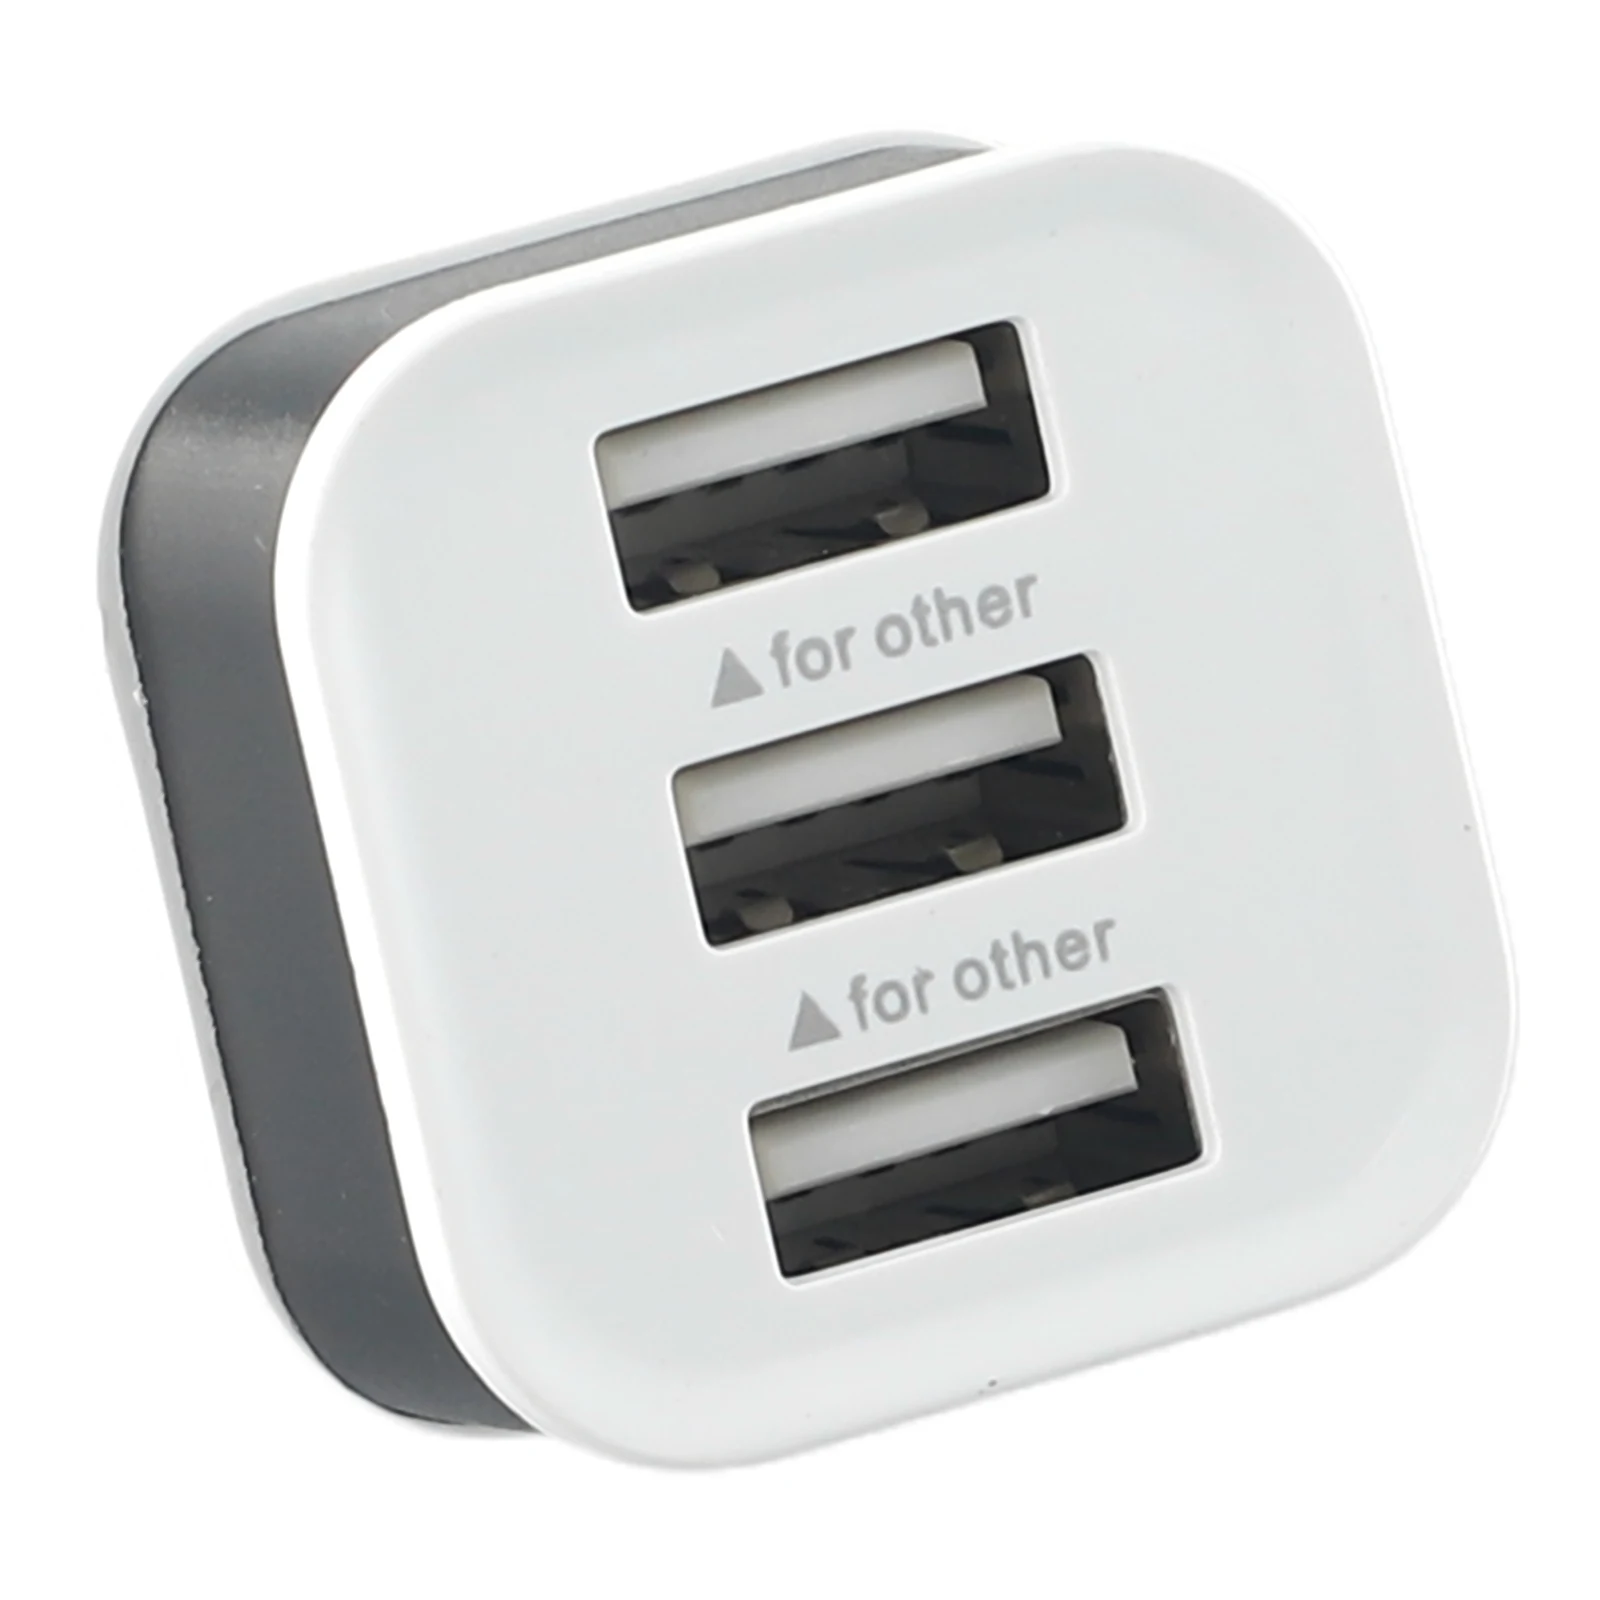 

3 Port Car USB Extender Slots Hub Adaptor USB 3in1 2.0 Multiple Quick Charge 3.1x3.1x3.5CM Auto Electronics Parts